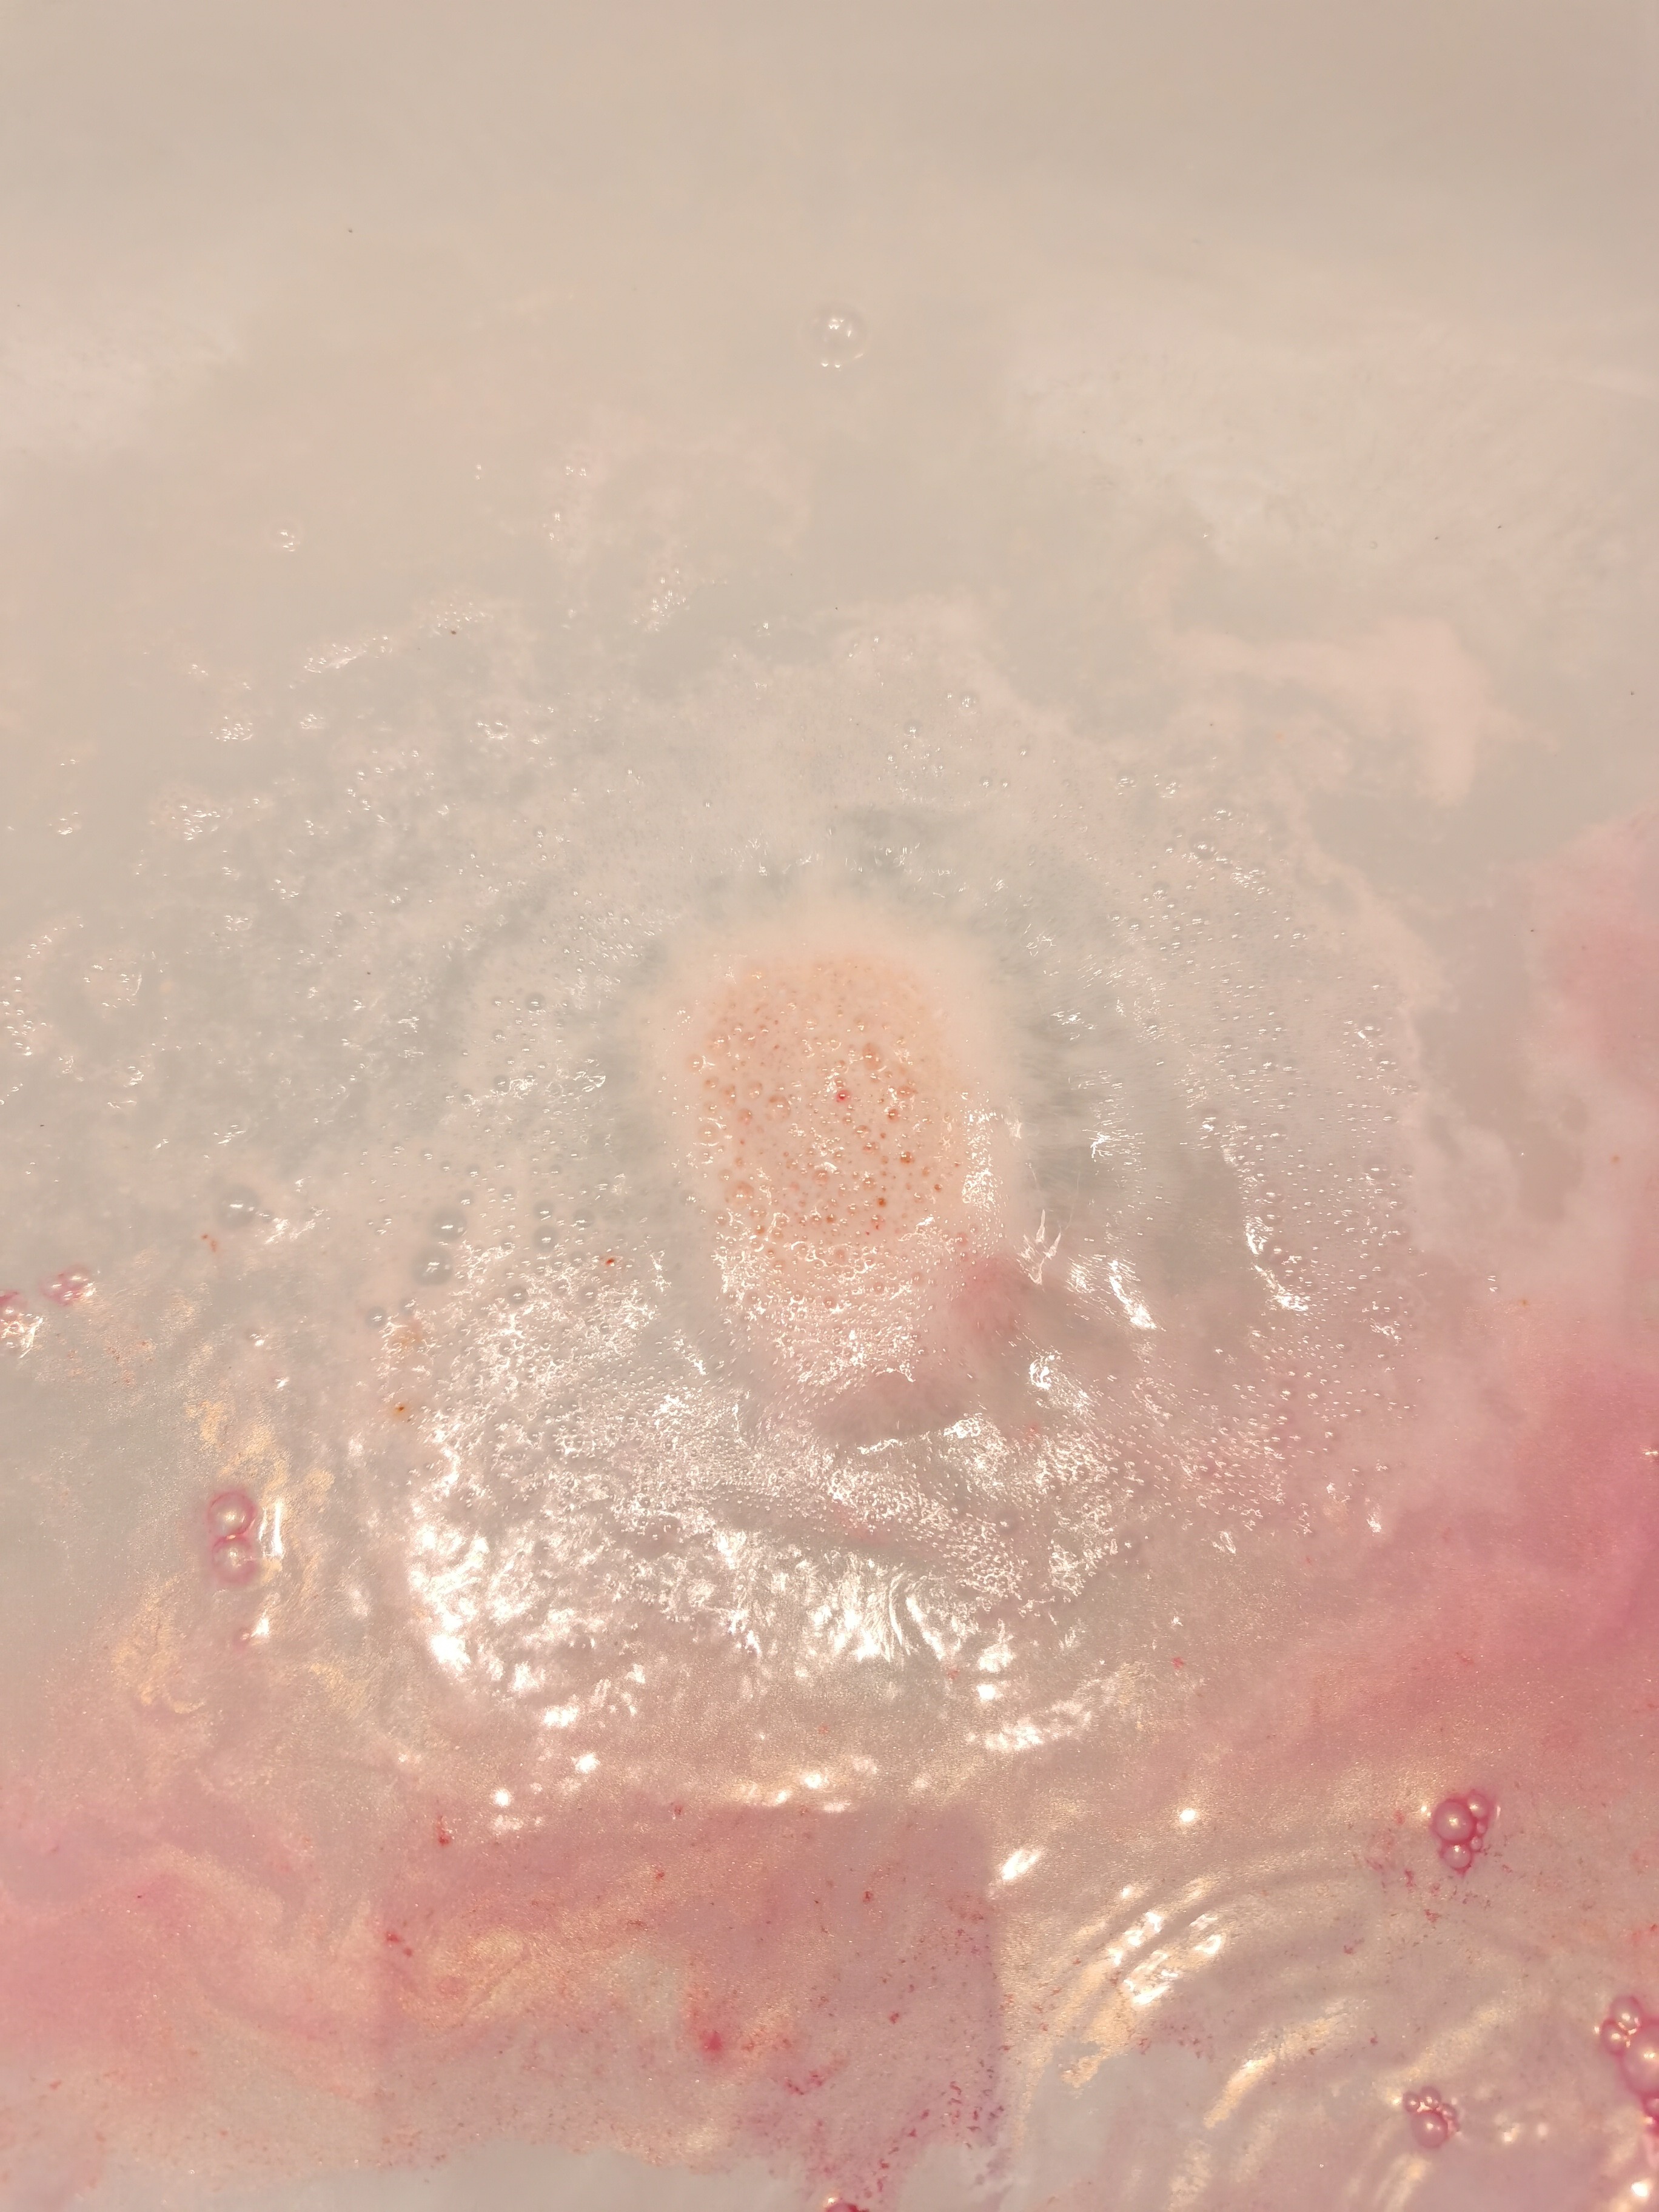 Rose Gold Shimmer Bath Bomb by Pearl Bath Bombs in the bath fizzing